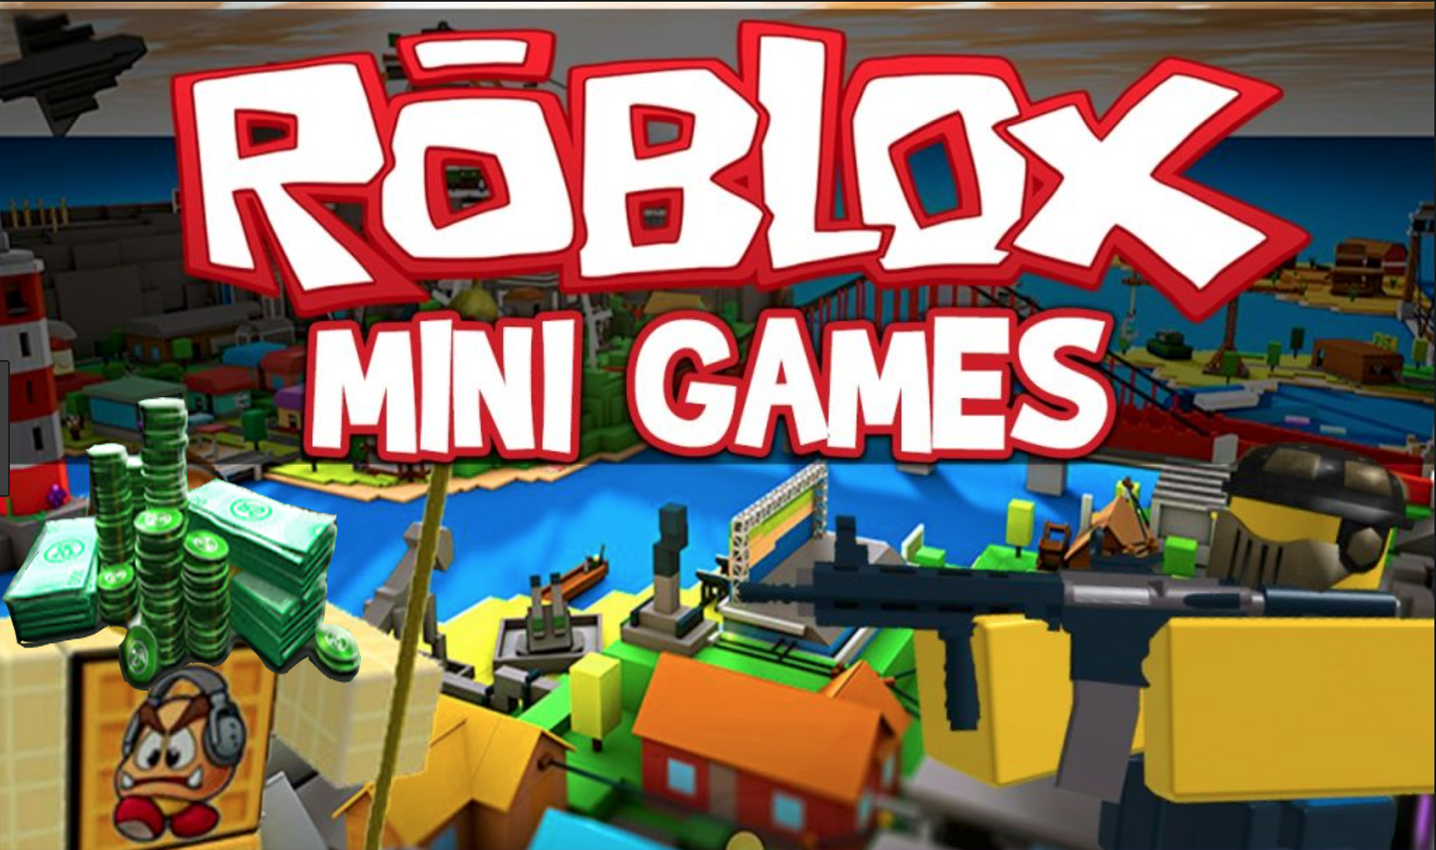 How To Get Free Robux For Roblox 2018 1 0 Apk Download Android - how to get free robux for roblox 2018 1 0 screenshot 2